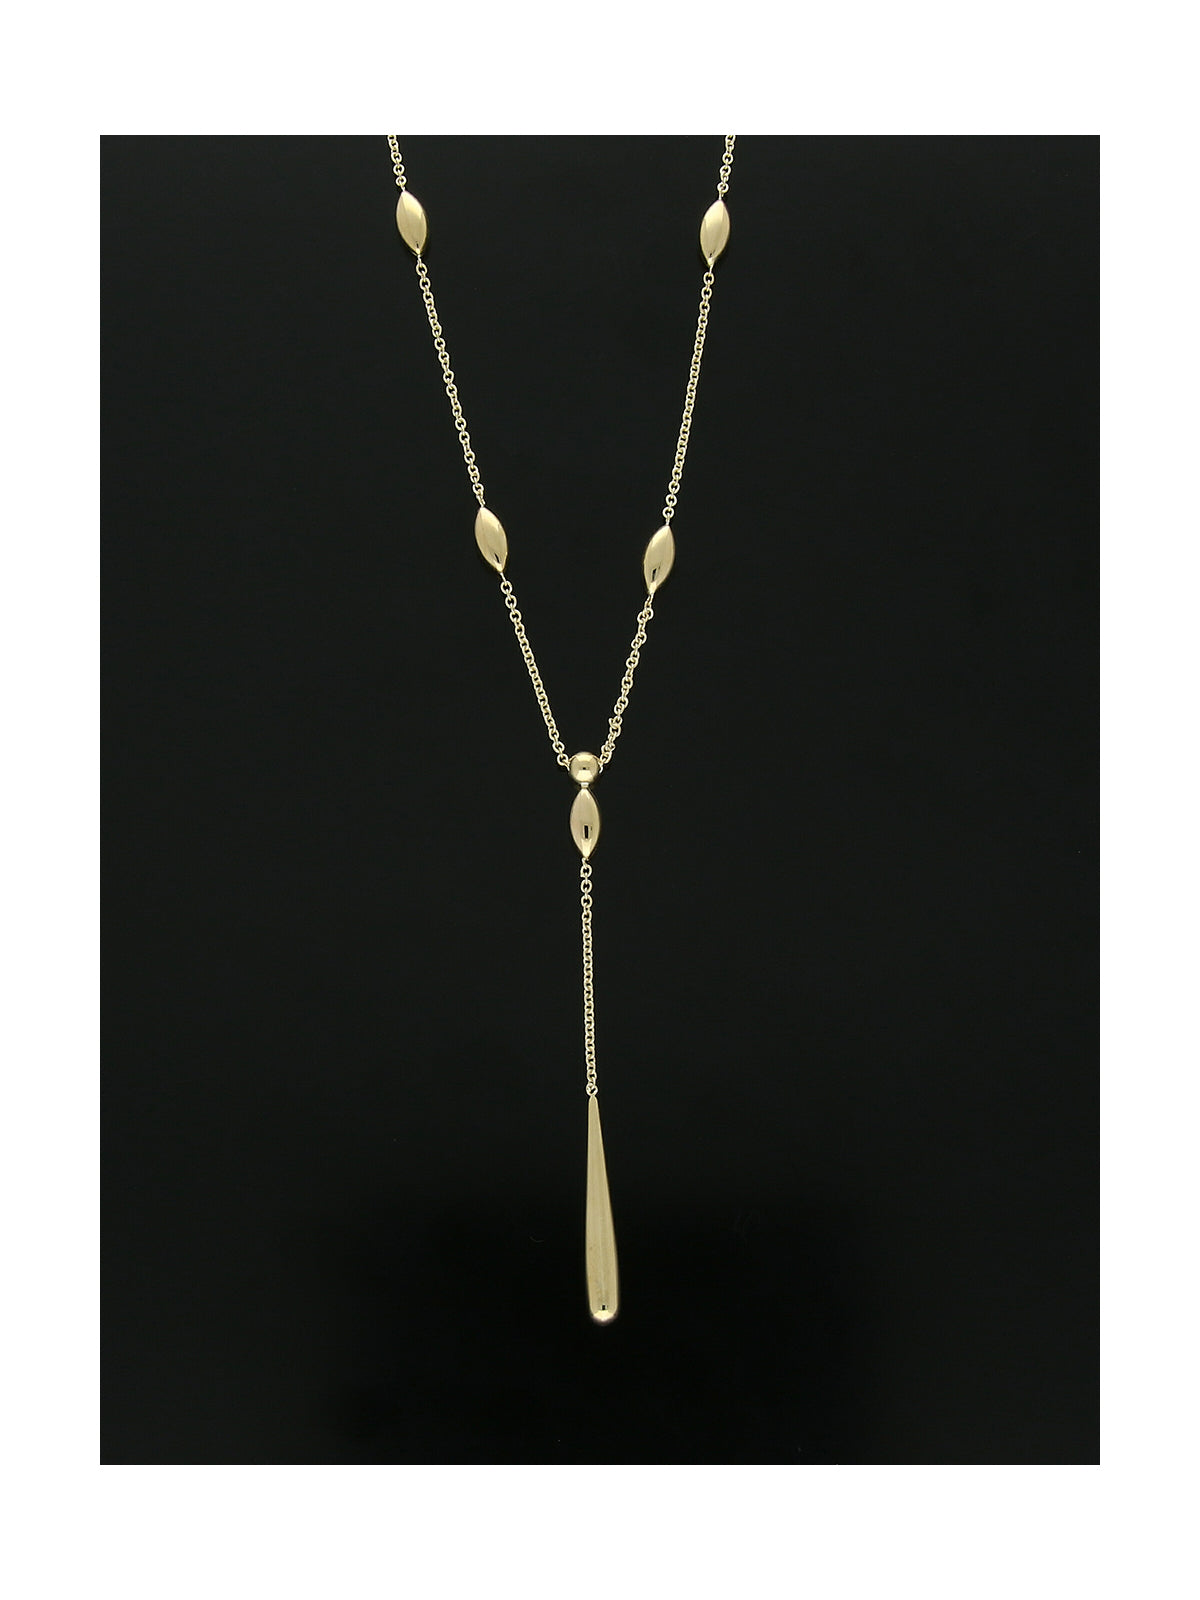 Chain and Bead Drop Necklace in 9ct Yellow Gold